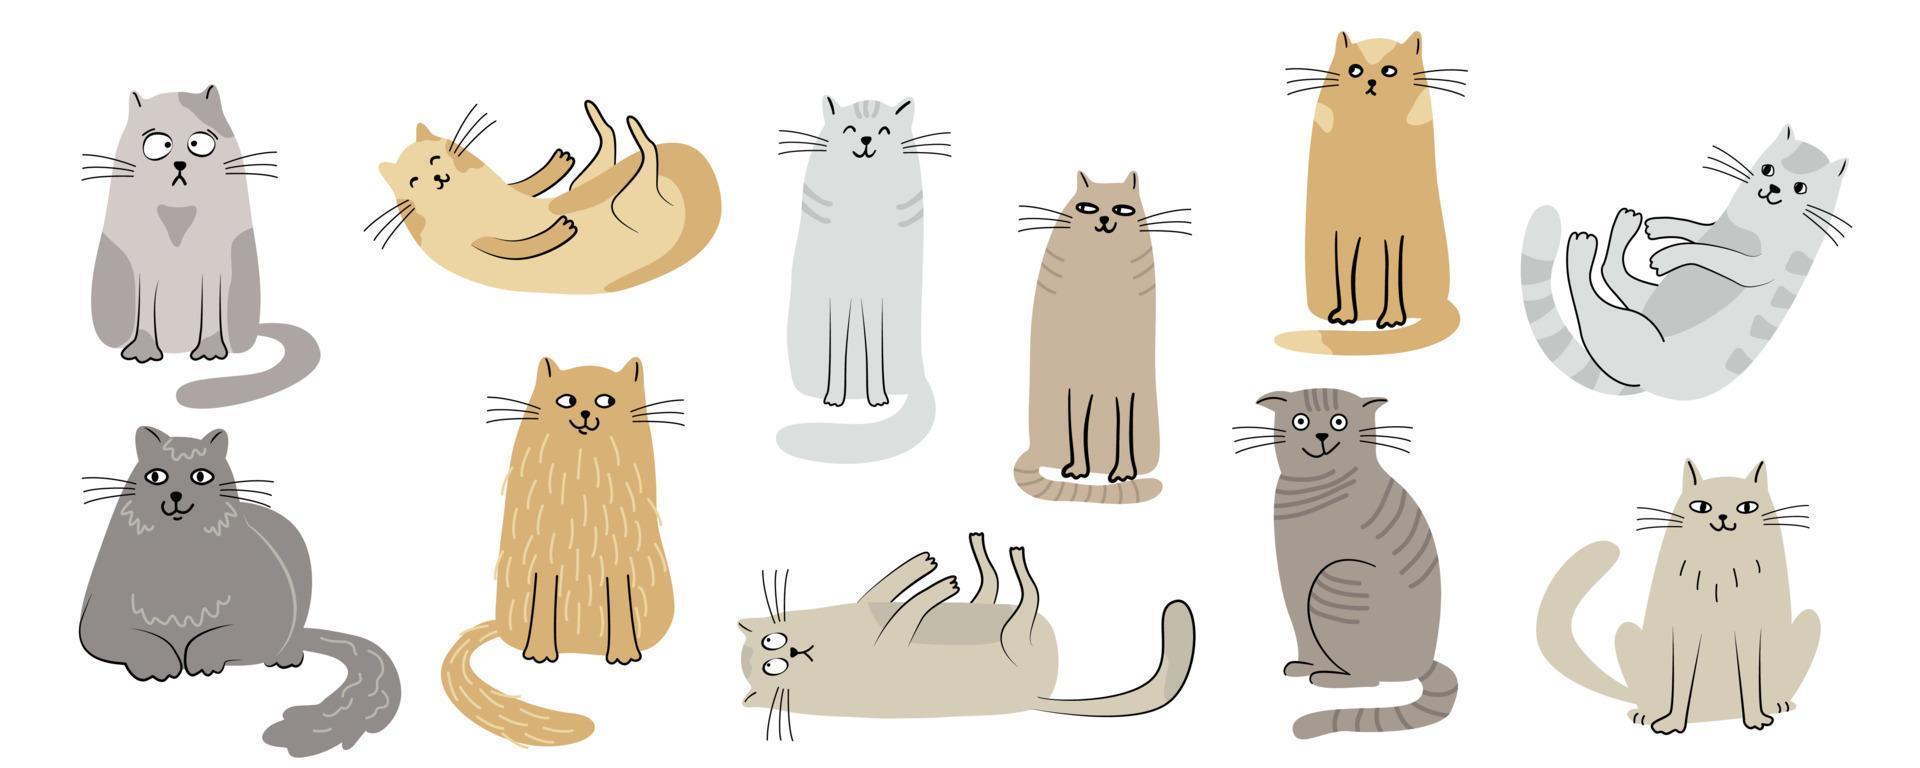 Cats set. Hand drawn flat vector illustration isolated on white background. Funny pet animal characters.